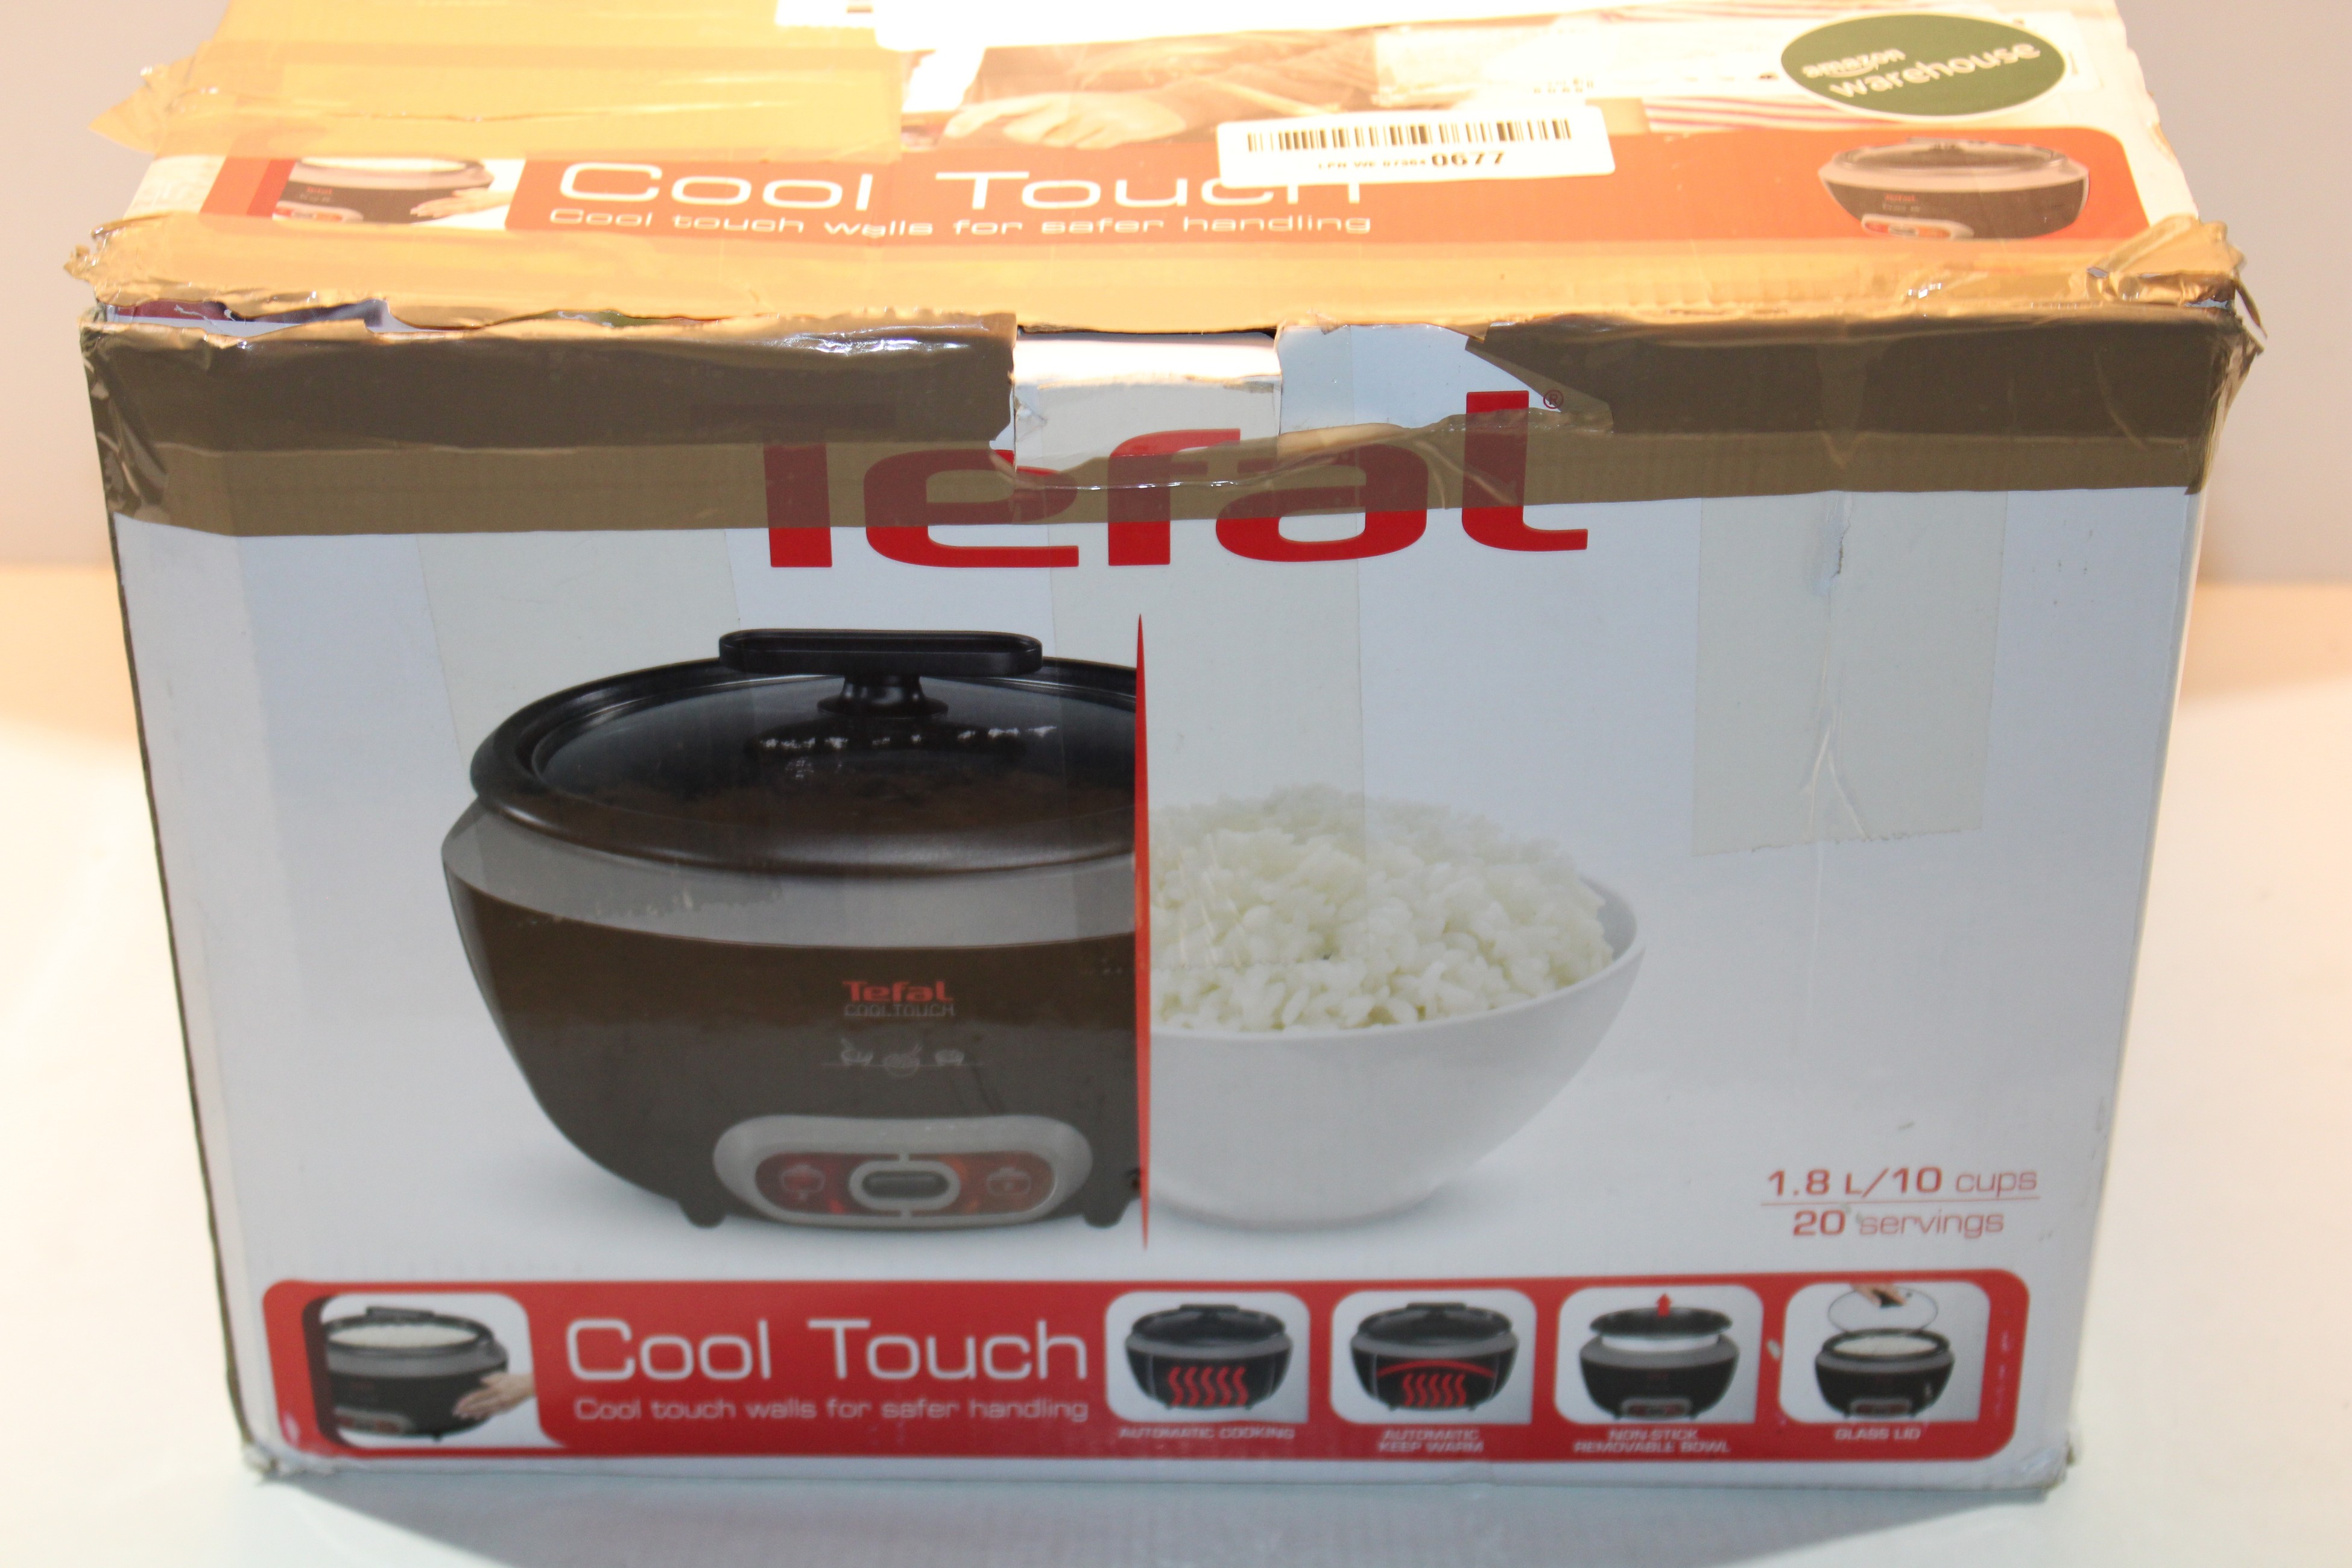 Tefal RK1568UK Cool Touch Rice Cooker 20 Portions 1.8 Litre Black 700 W